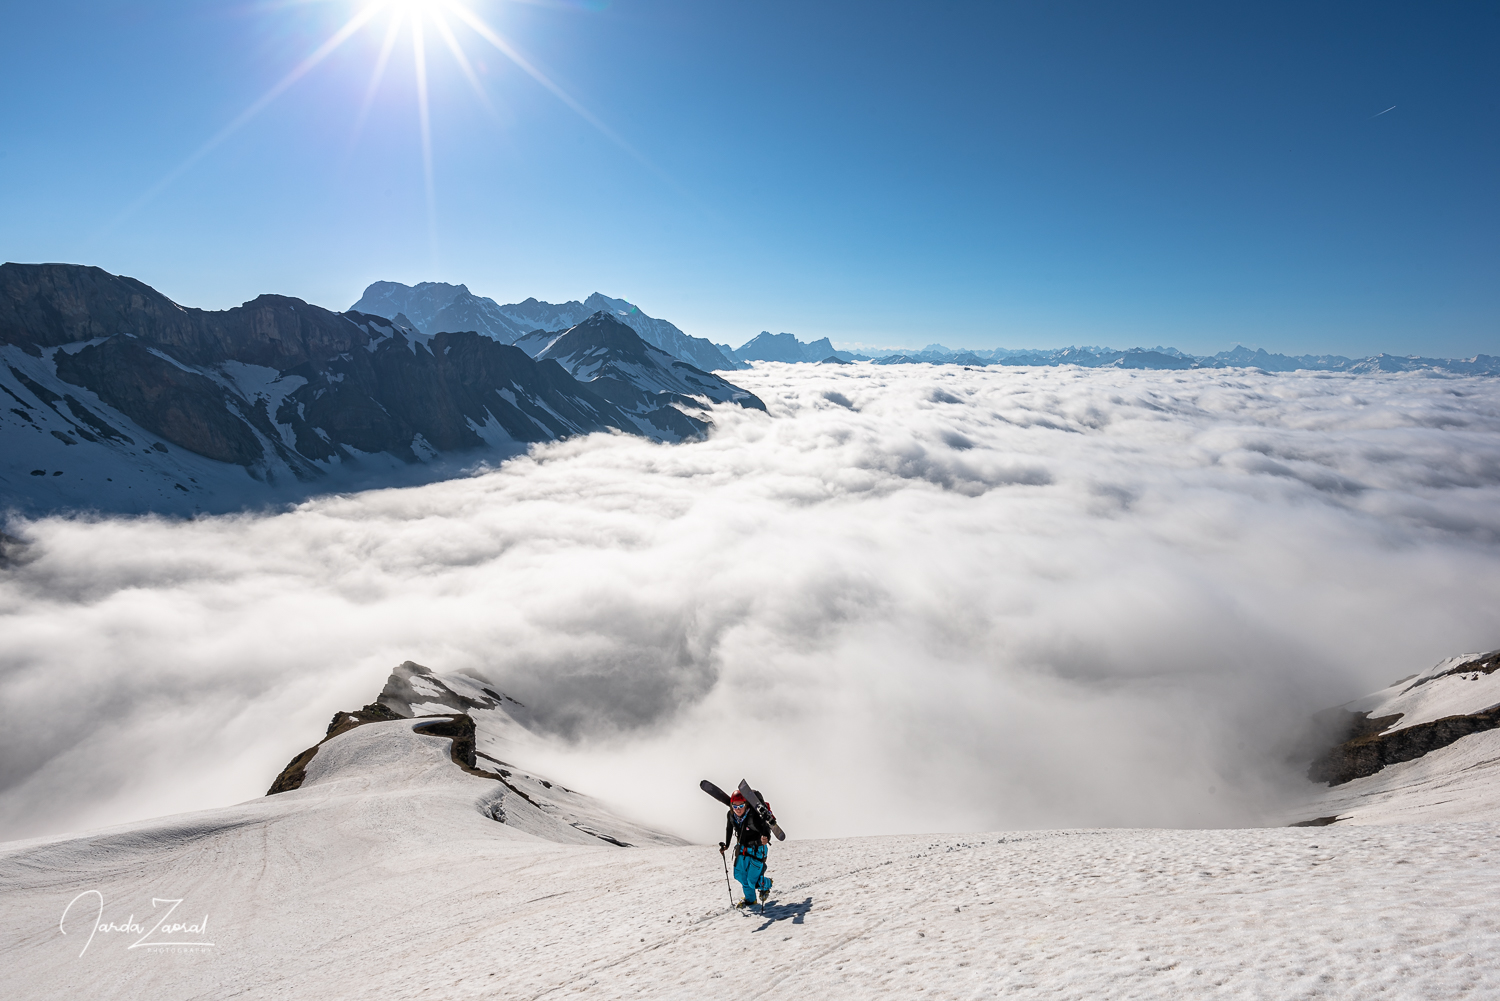 Above clouds in Swiss mountains